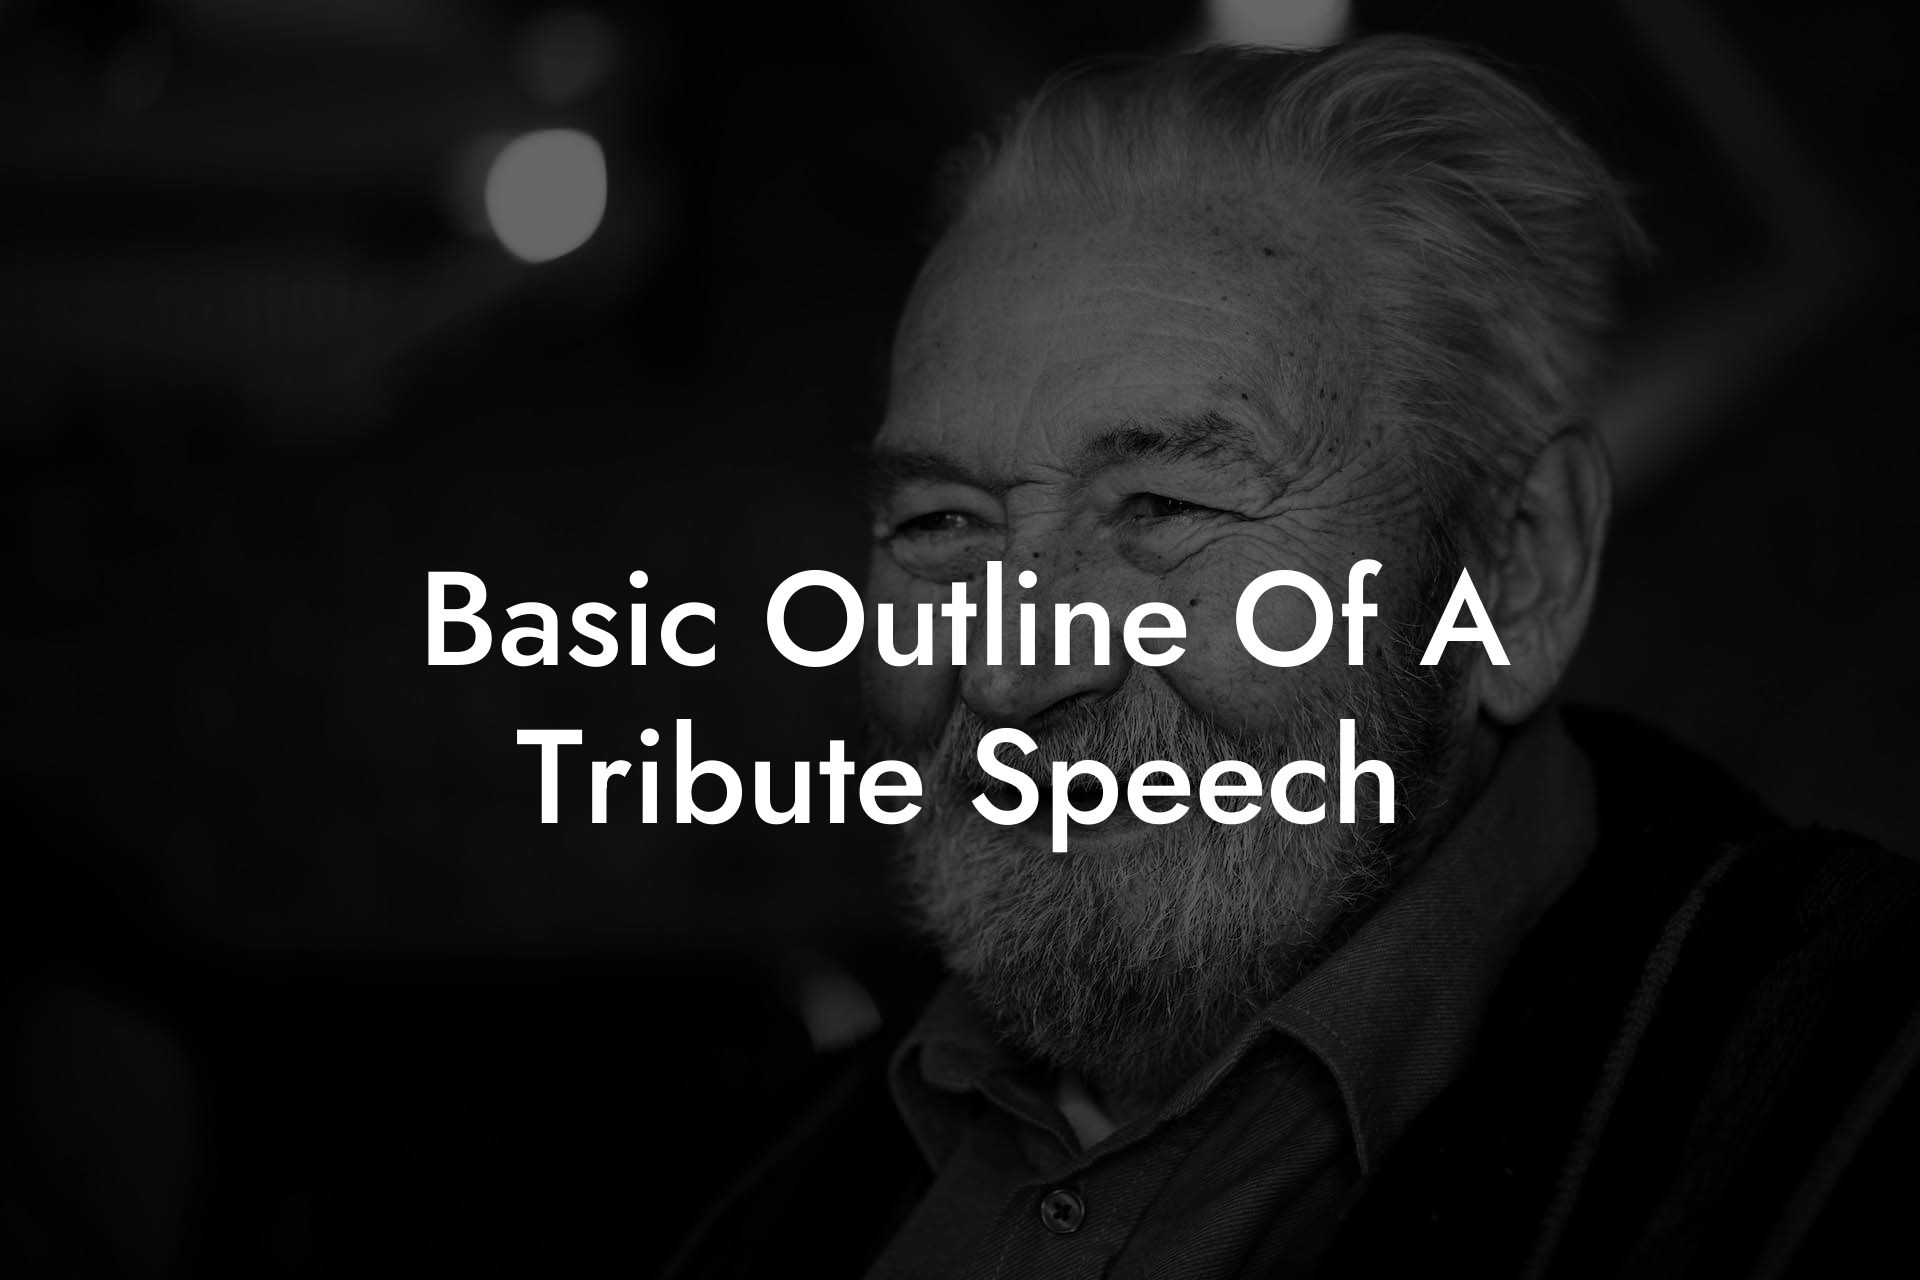 Basic Outline Of A Tribute Speech